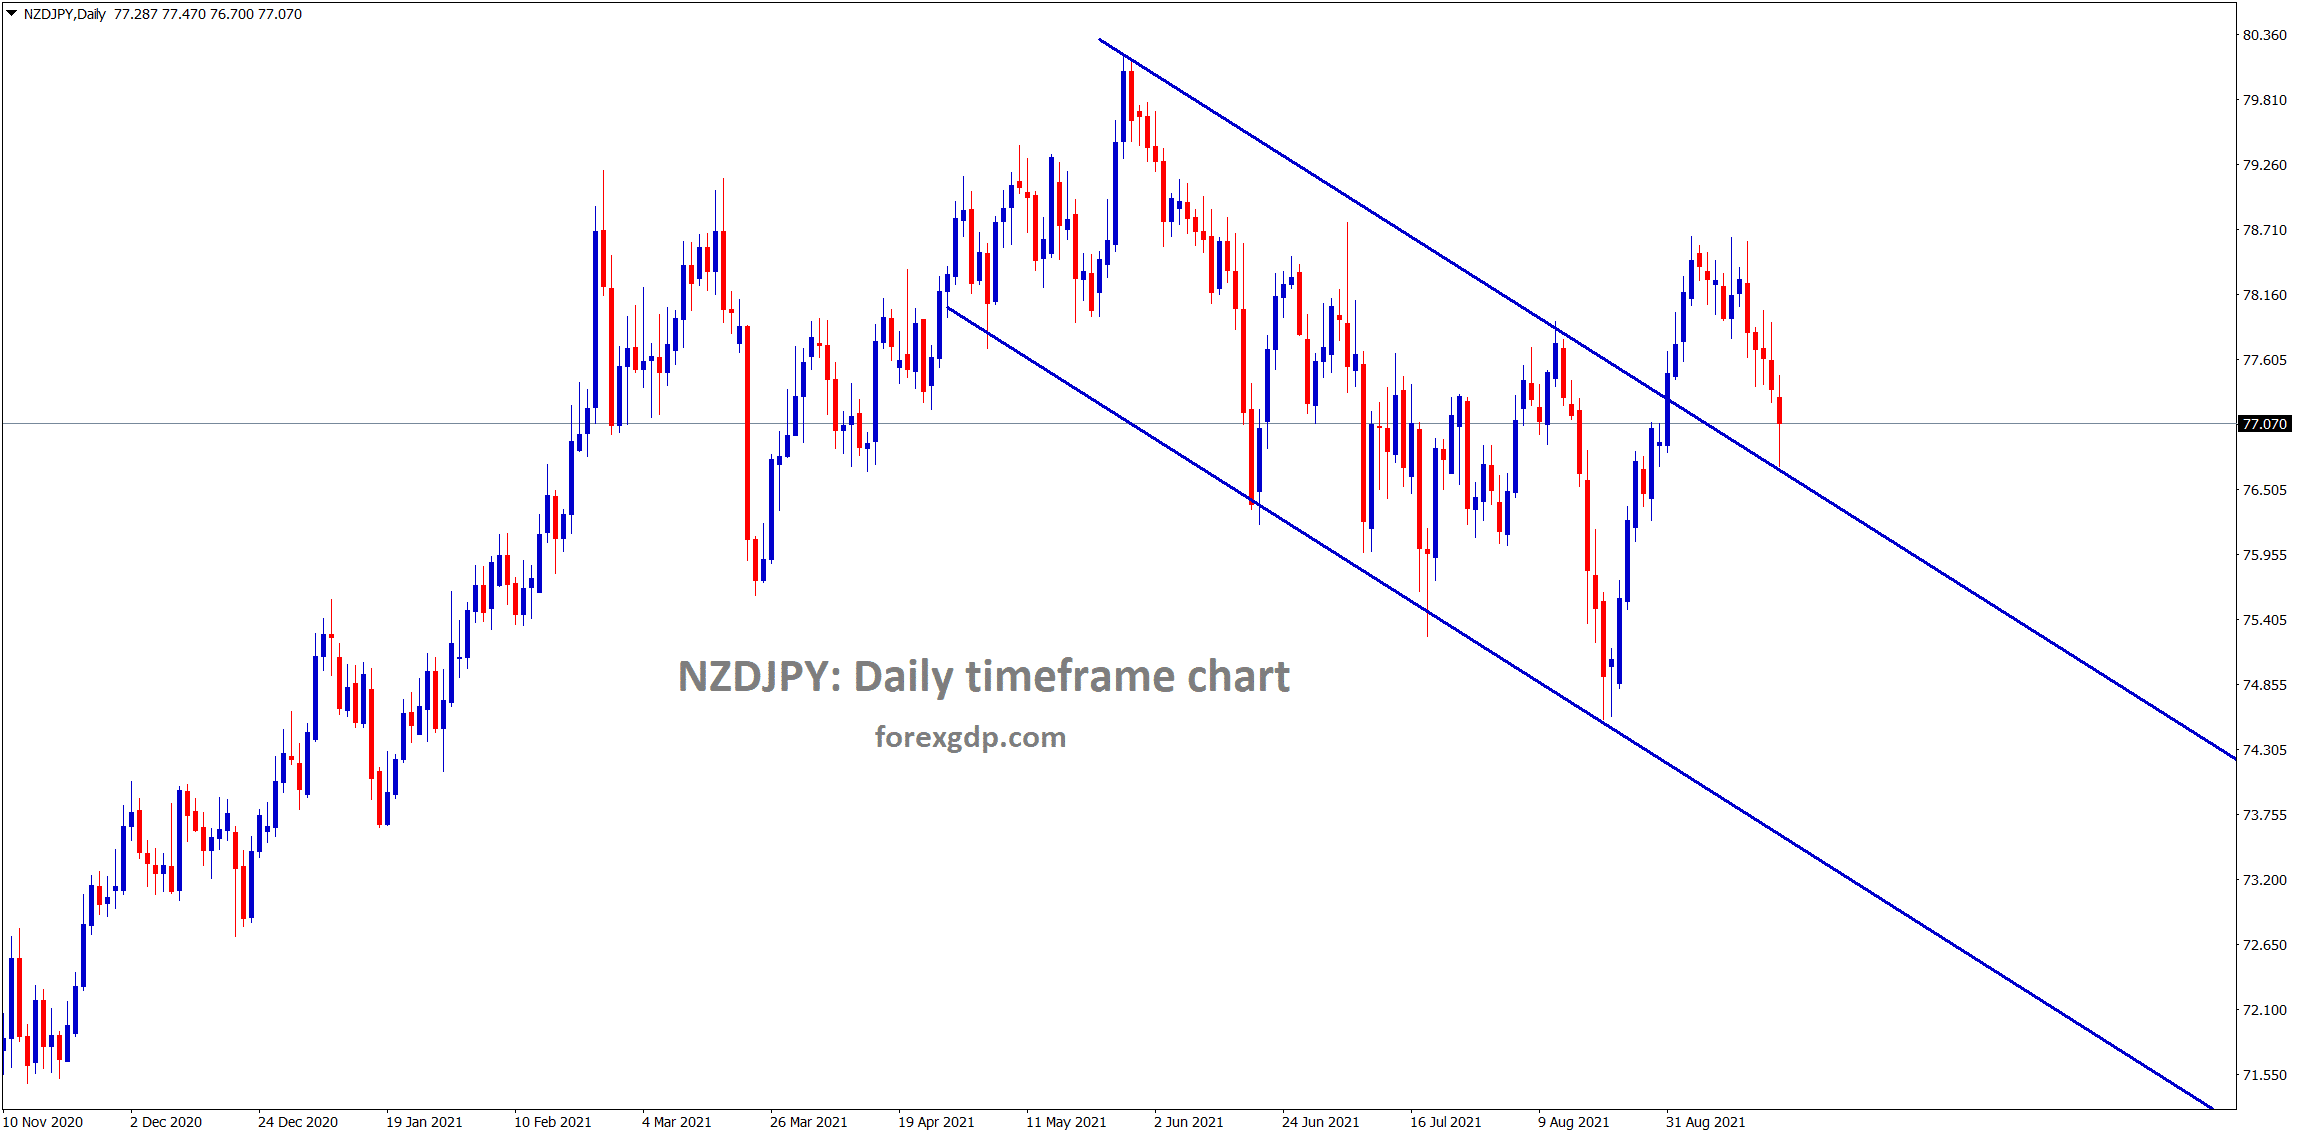 NZDJPY came to the retest zone of the broken descending channel